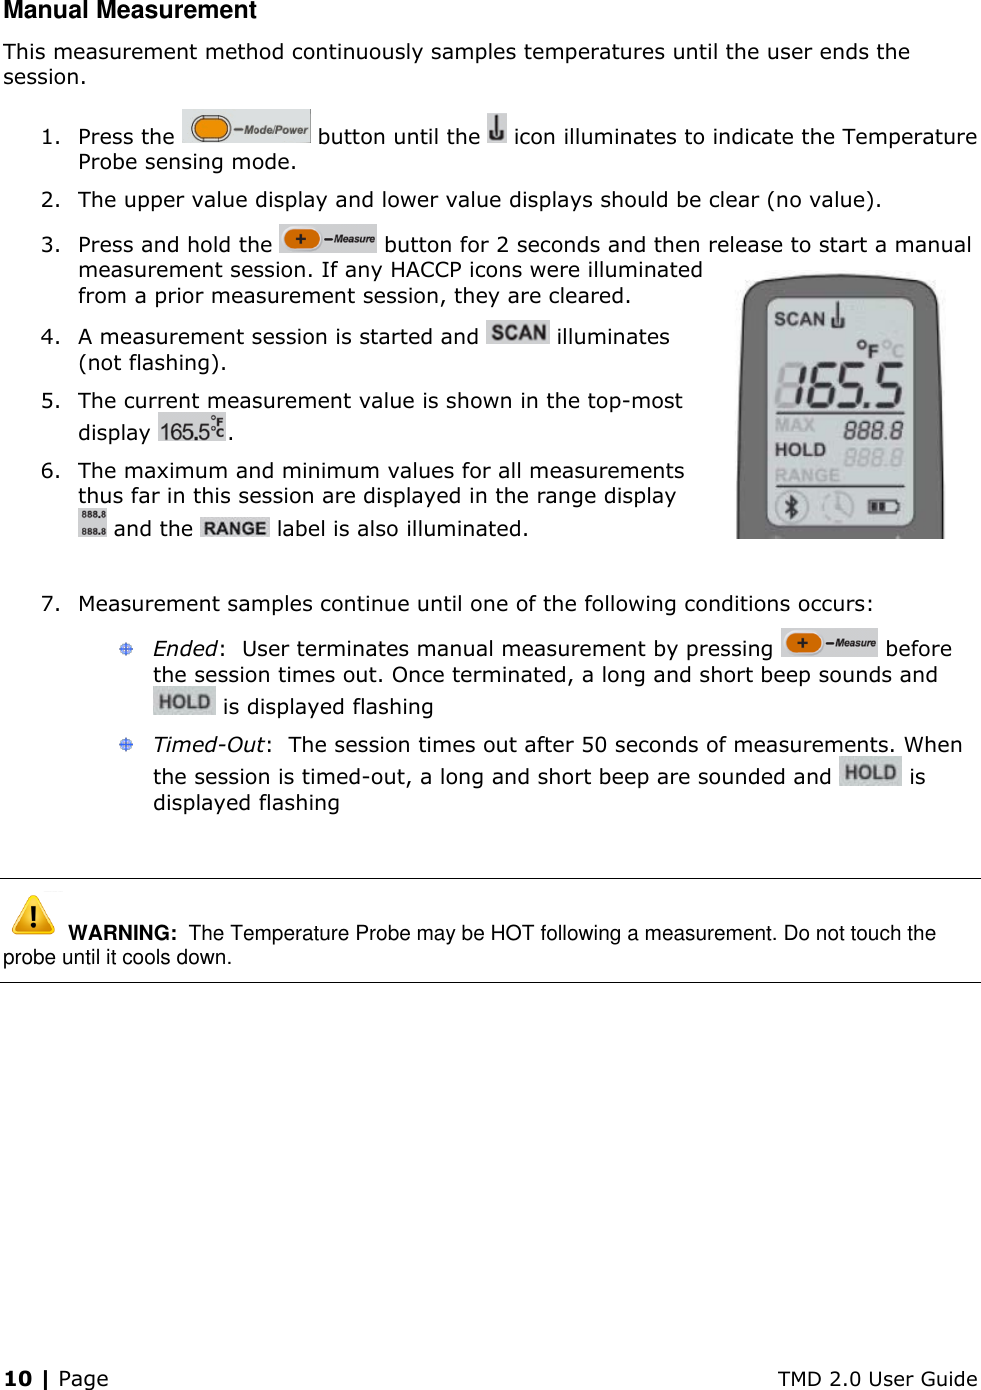 10 | Page    TMD 2.0 User Guide Manual Measurement This measurement method continuously samples temperatures until the user ends the session. 1. Press the   button until the   icon illuminates to indicate the Temperature Probe sensing mode. 2. The upper value display and lower value displays should be clear (no value). 3. Press and hold the   button for 2 seconds and then release to start a manual measurement session. If any HACCP icons were illuminated from a prior measurement session, they are cleared. 4. A measurement session is started and   illuminates (not flashing). 5. The current measurement value is shown in the top-most display  .  6. The maximum and minimum values for all measurements thus far in this session are displayed in the range display  and the   label is also illuminated.  7. Measurement samples continue until one of the following conditions occurs:  Ended:  User terminates manual measurement by pressing   before the session times out. Once terminated, a long and short beep sounds and  is displayed flashing  Timed-Out:  The session times out after 50 seconds of measurements. When the session is timed-out, a long and short beep are sounded and   is displayed flashing   WARNING:  The Temperature Probe may be HOT following a measurement. Do not touch the probe until it cools down. 